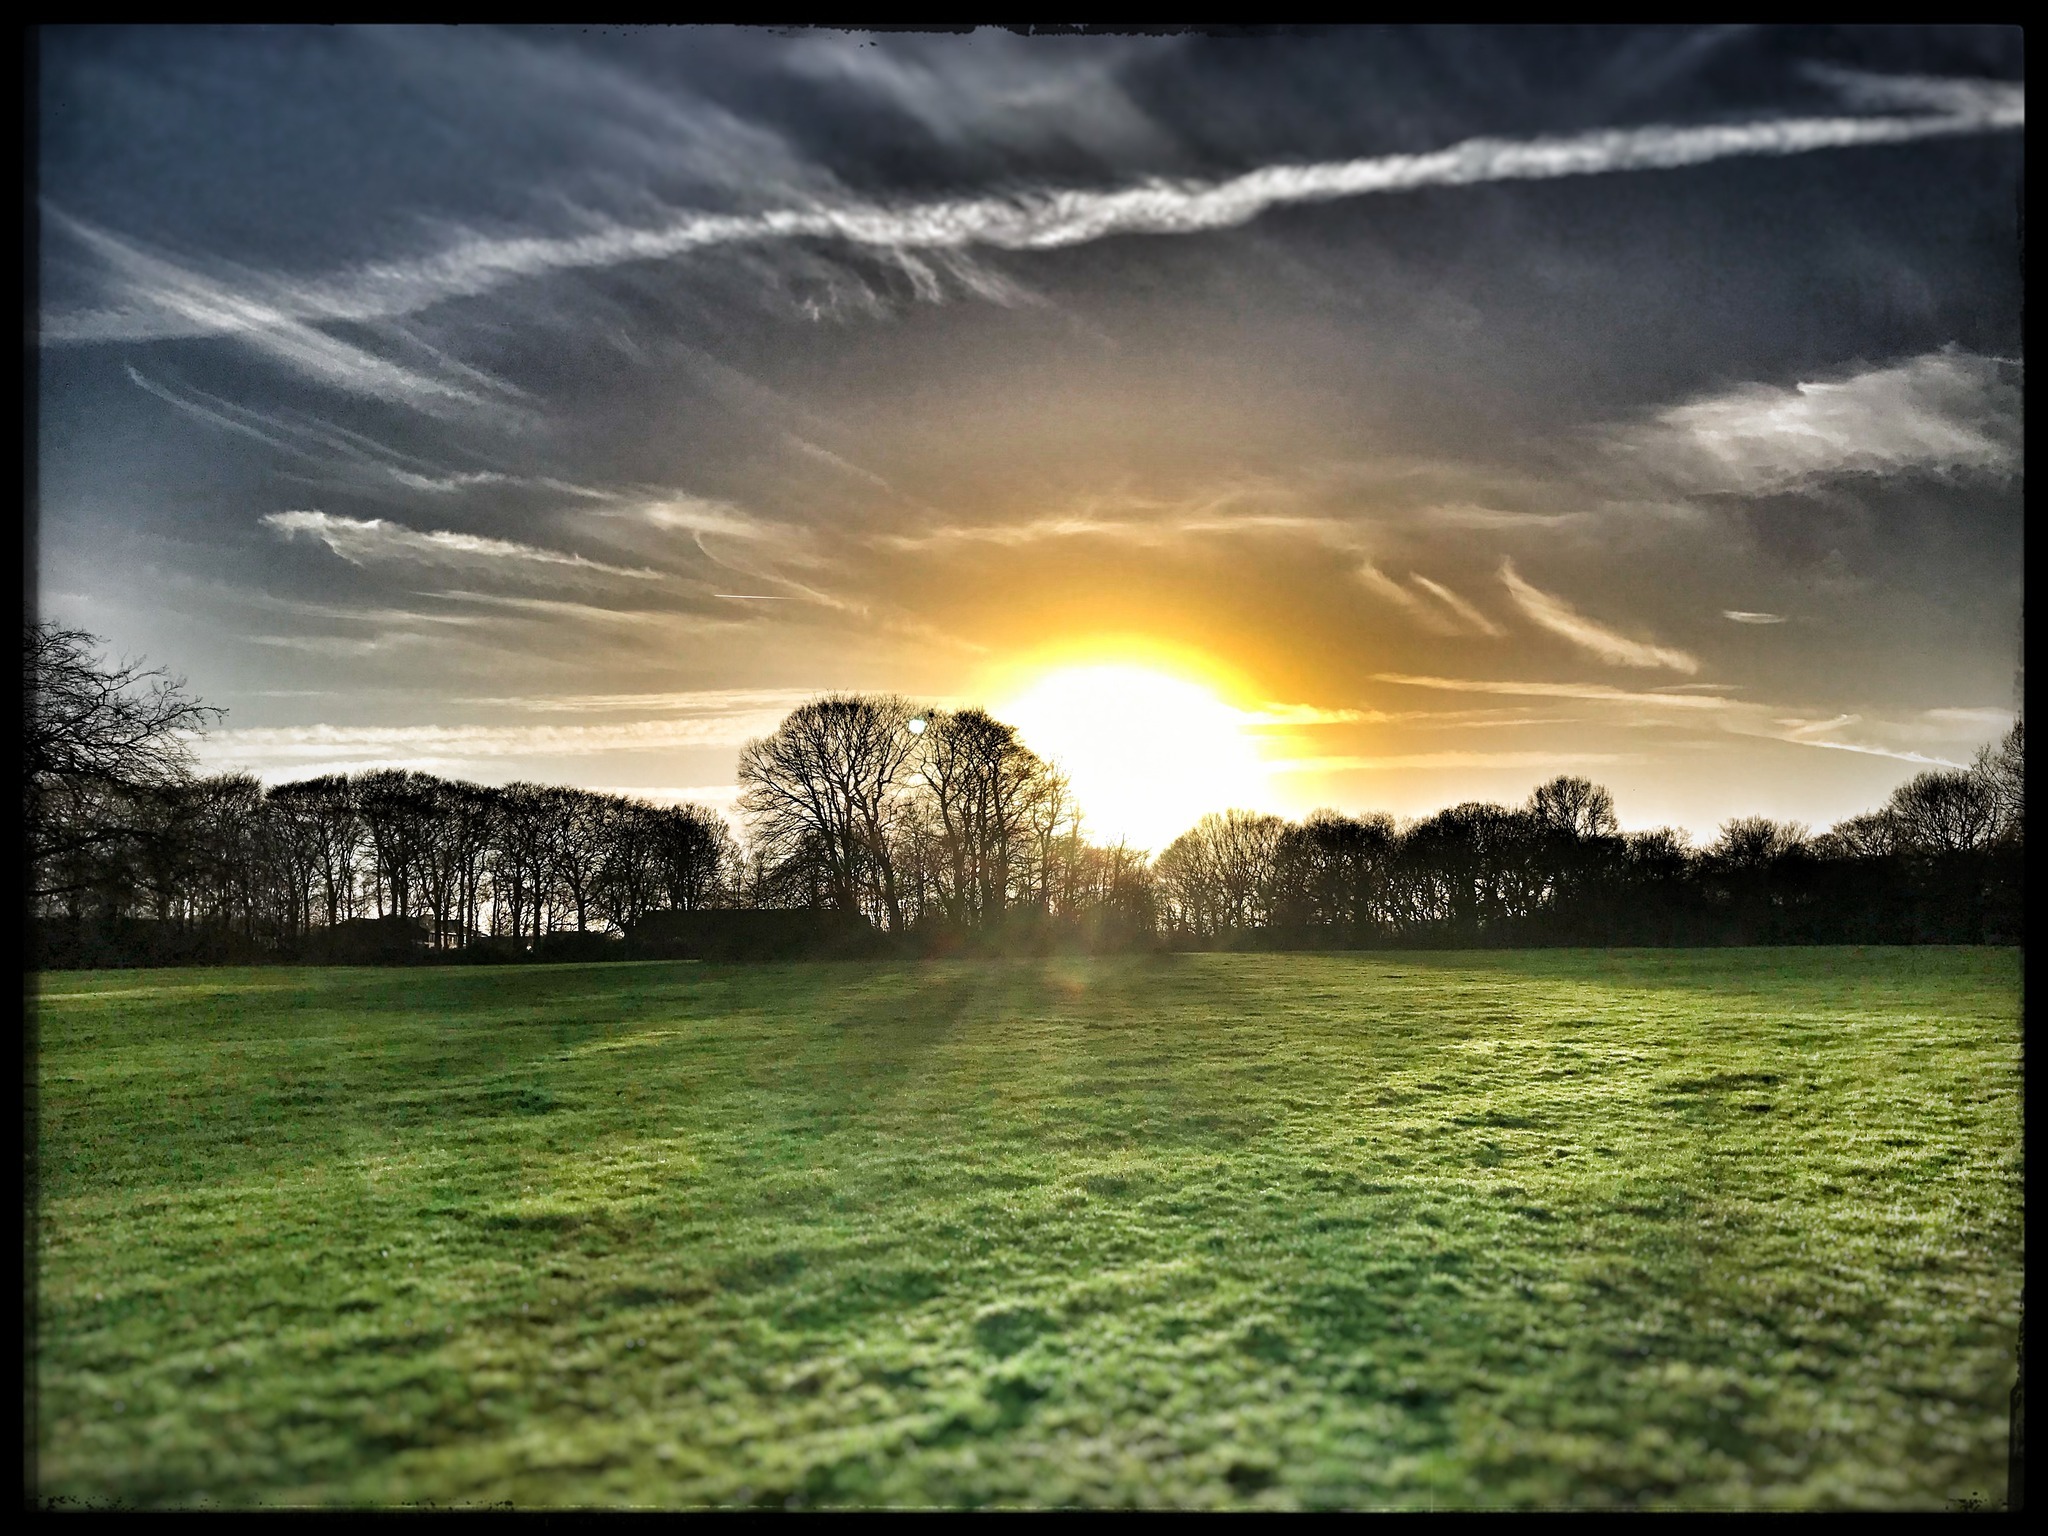 Sunset at Sherdley Park by Kevin Moulsdale